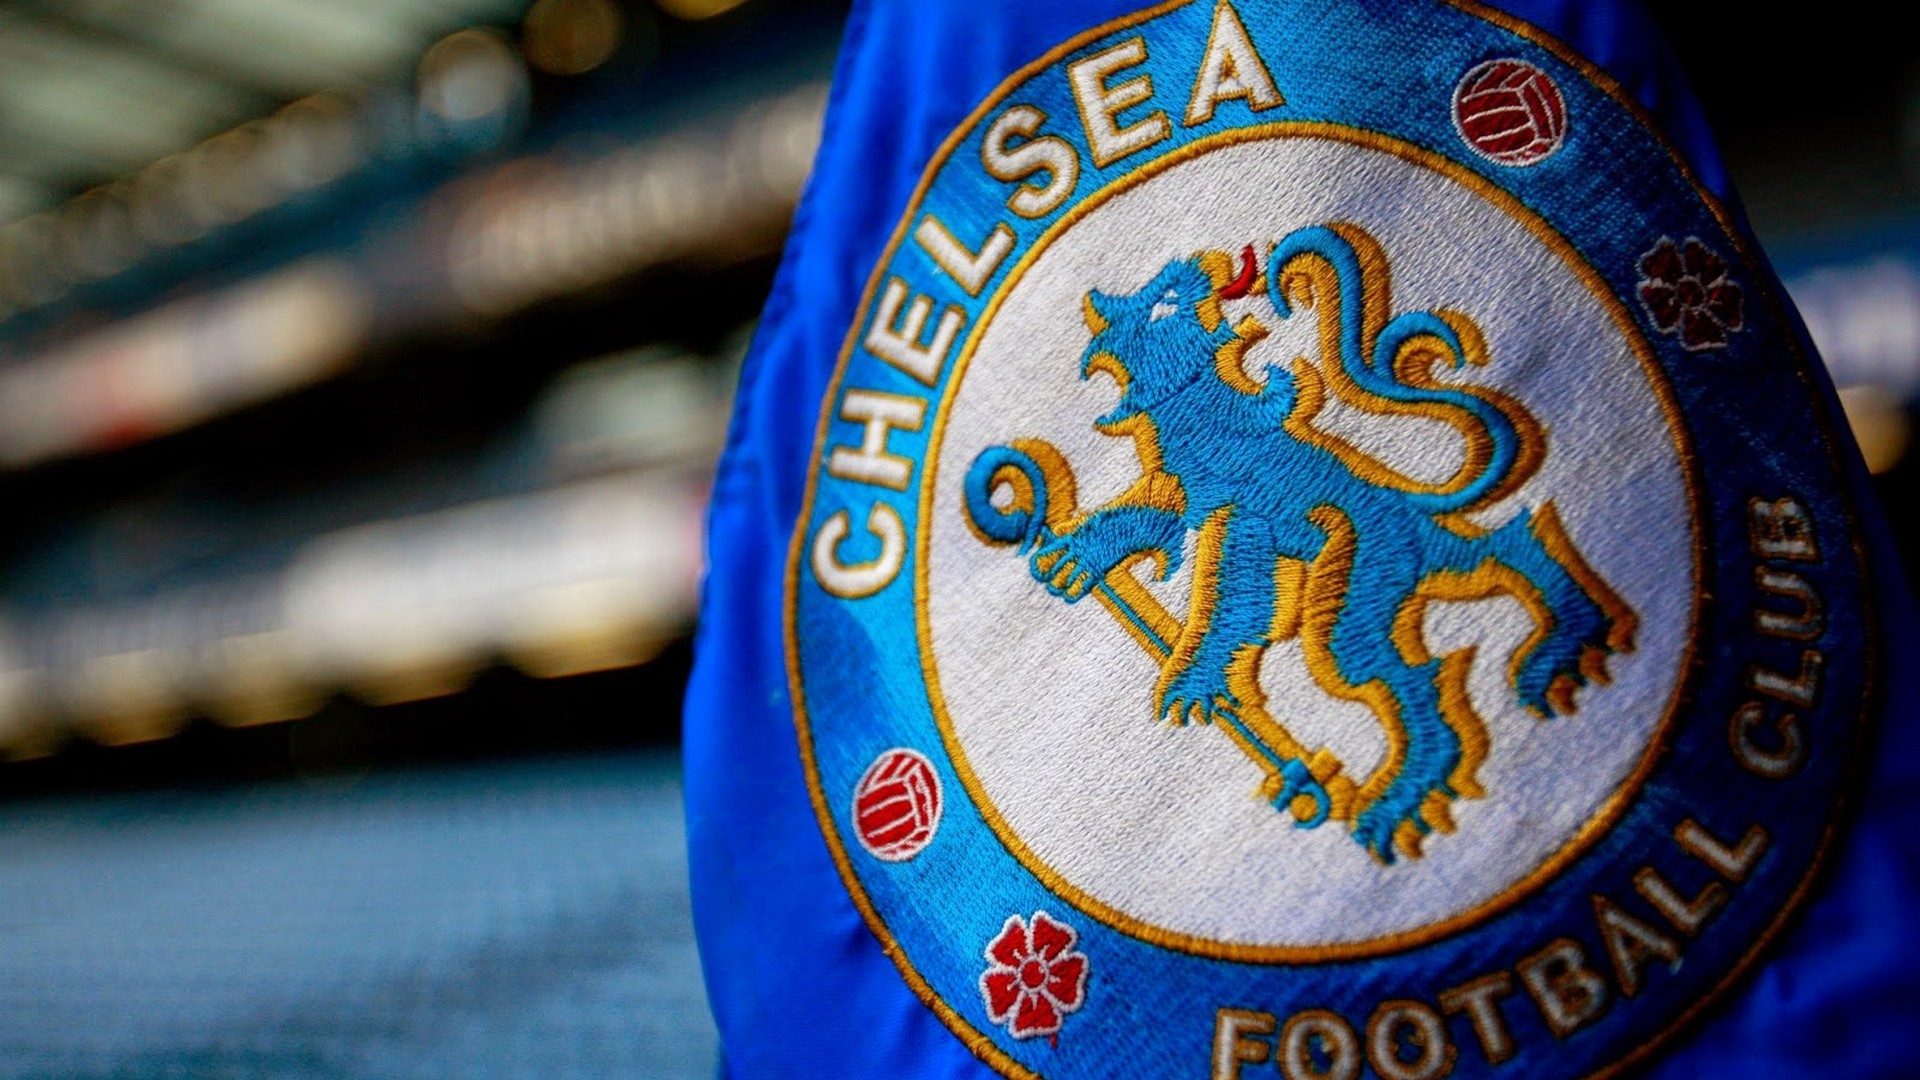 Wallpaper Desktop Chelsea HD With Resolution 1920X1080 pixel. You can make this wallpaper for your Mac or Windows Desktop Background, iPhone, Android or Tablet and another Smartphone device for free